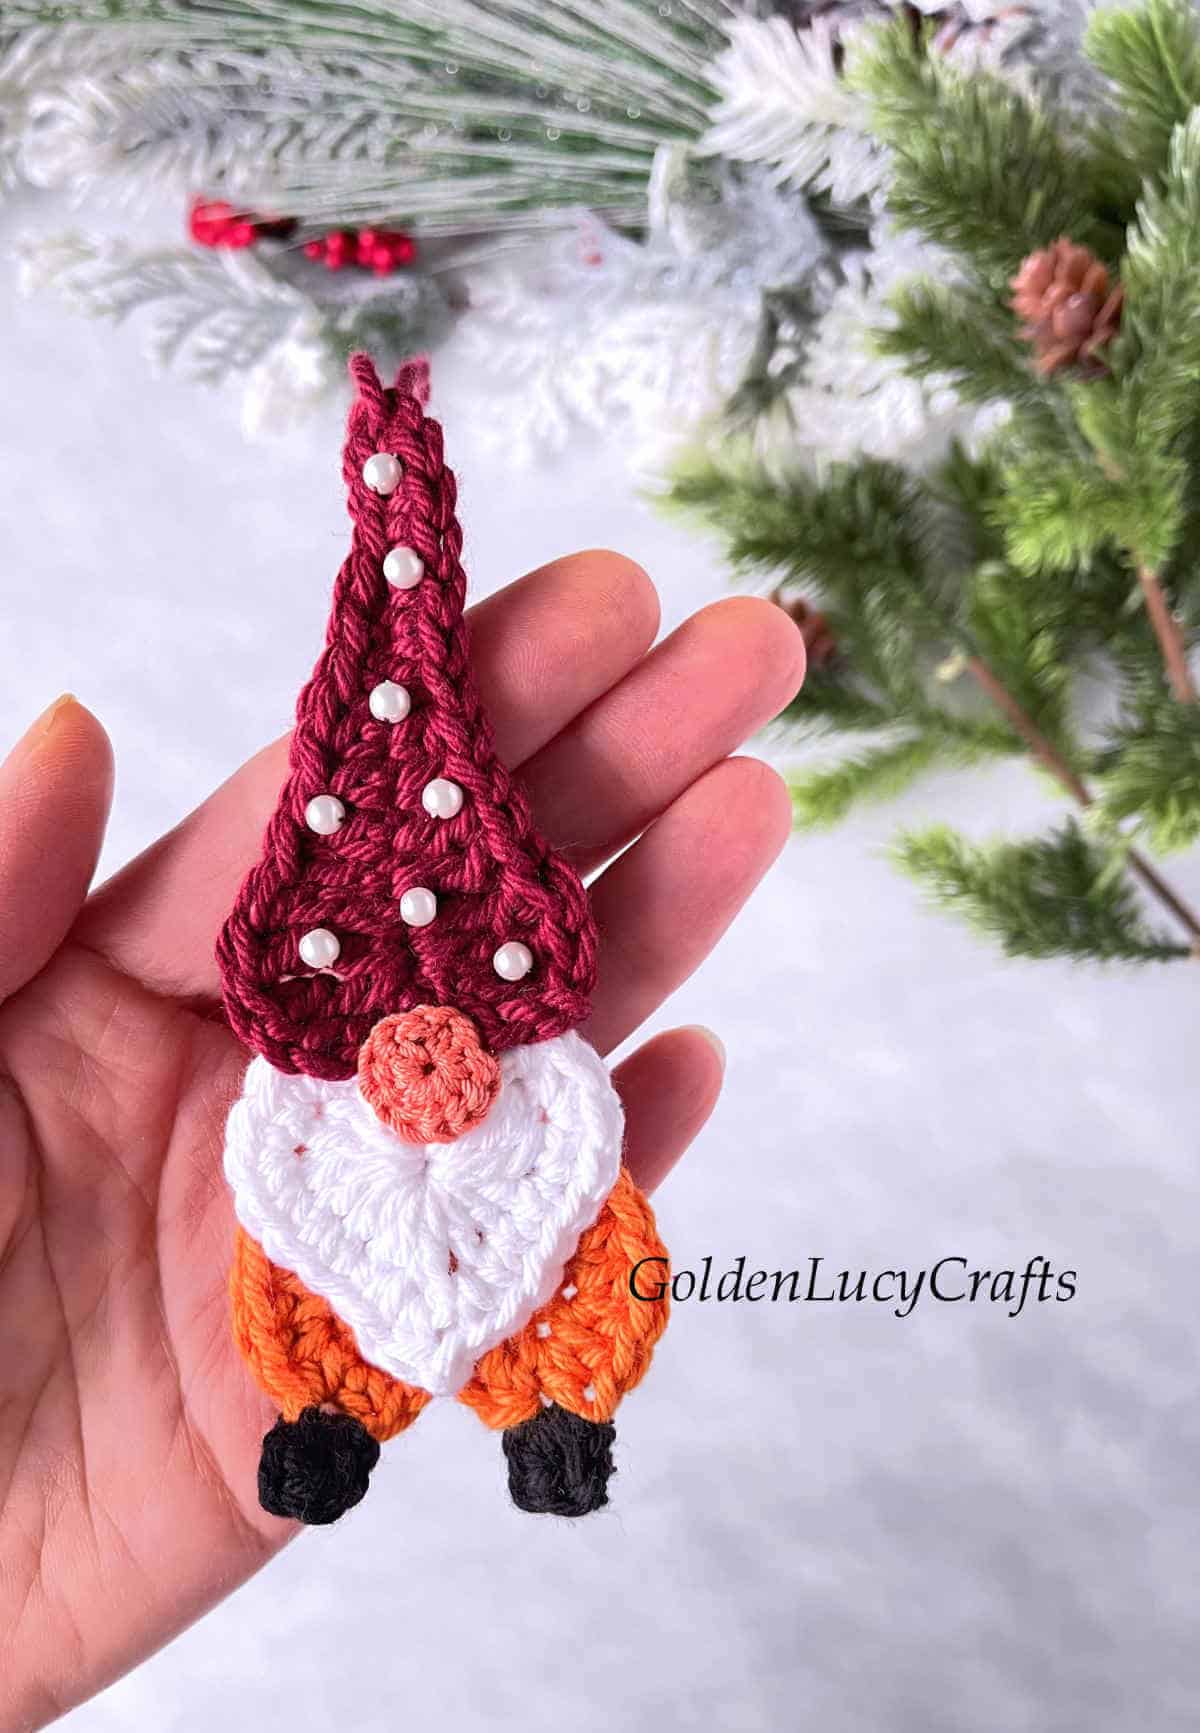 Crochet gnome ornament made from hearts in the palm of a hand.